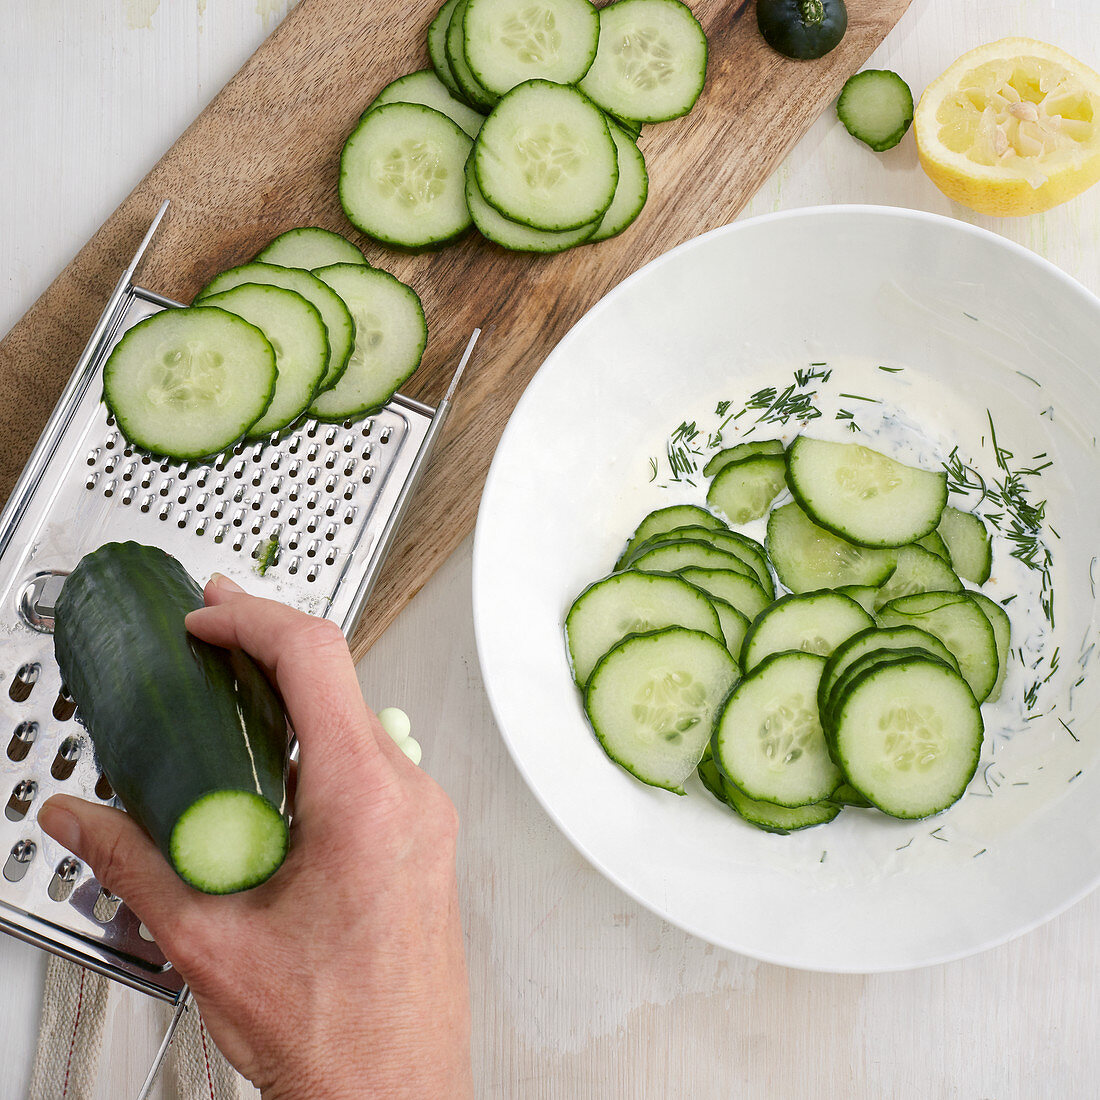 Cucumbers being sliced for a salad